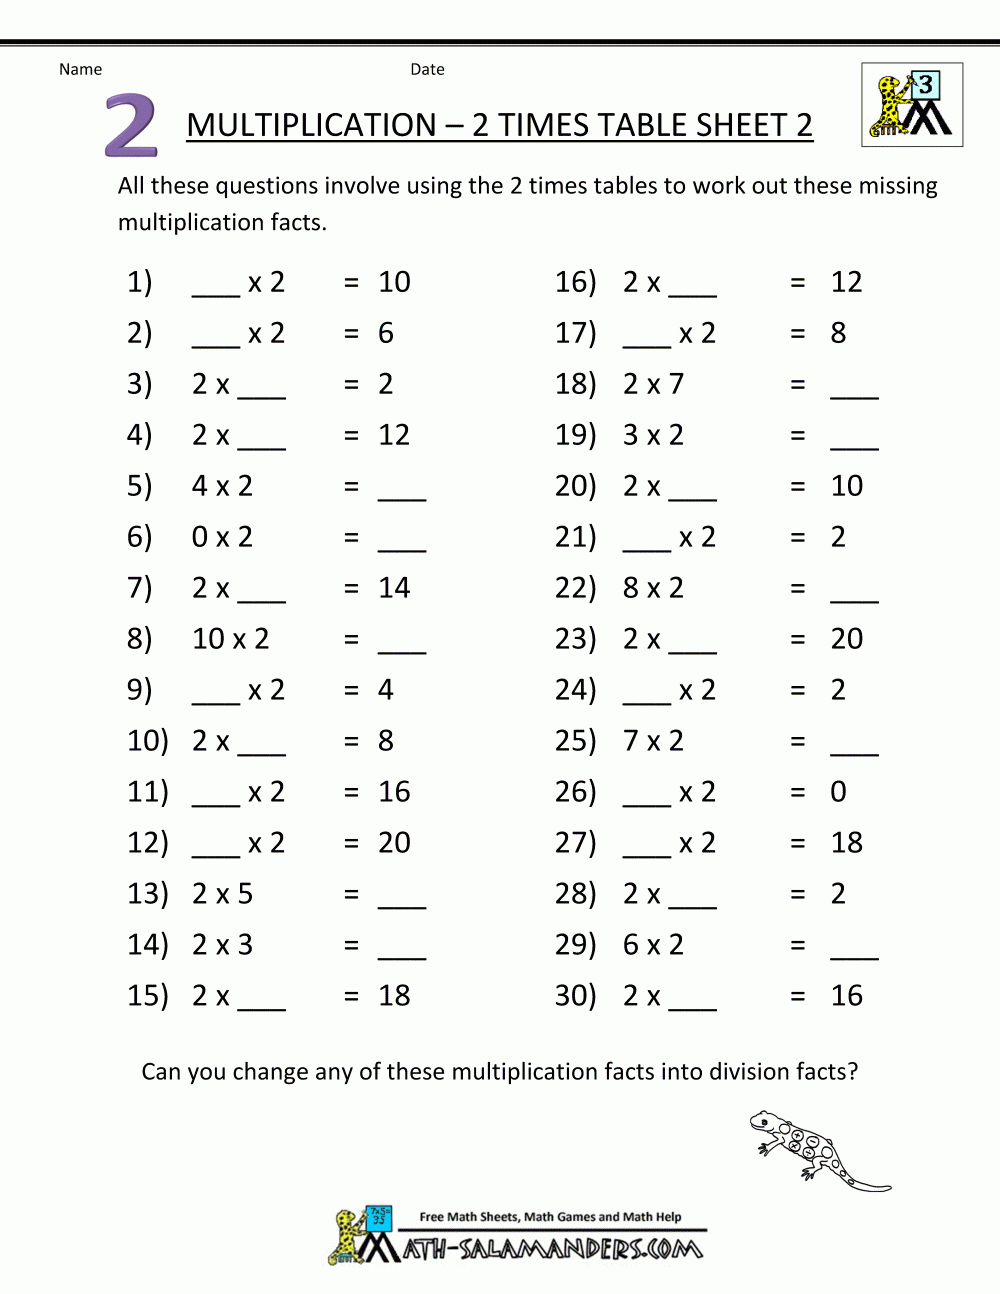 Multiplication Drill Sheets 2 Times Table 2 | Printable Math for Multiplication Worksheets X2 X3